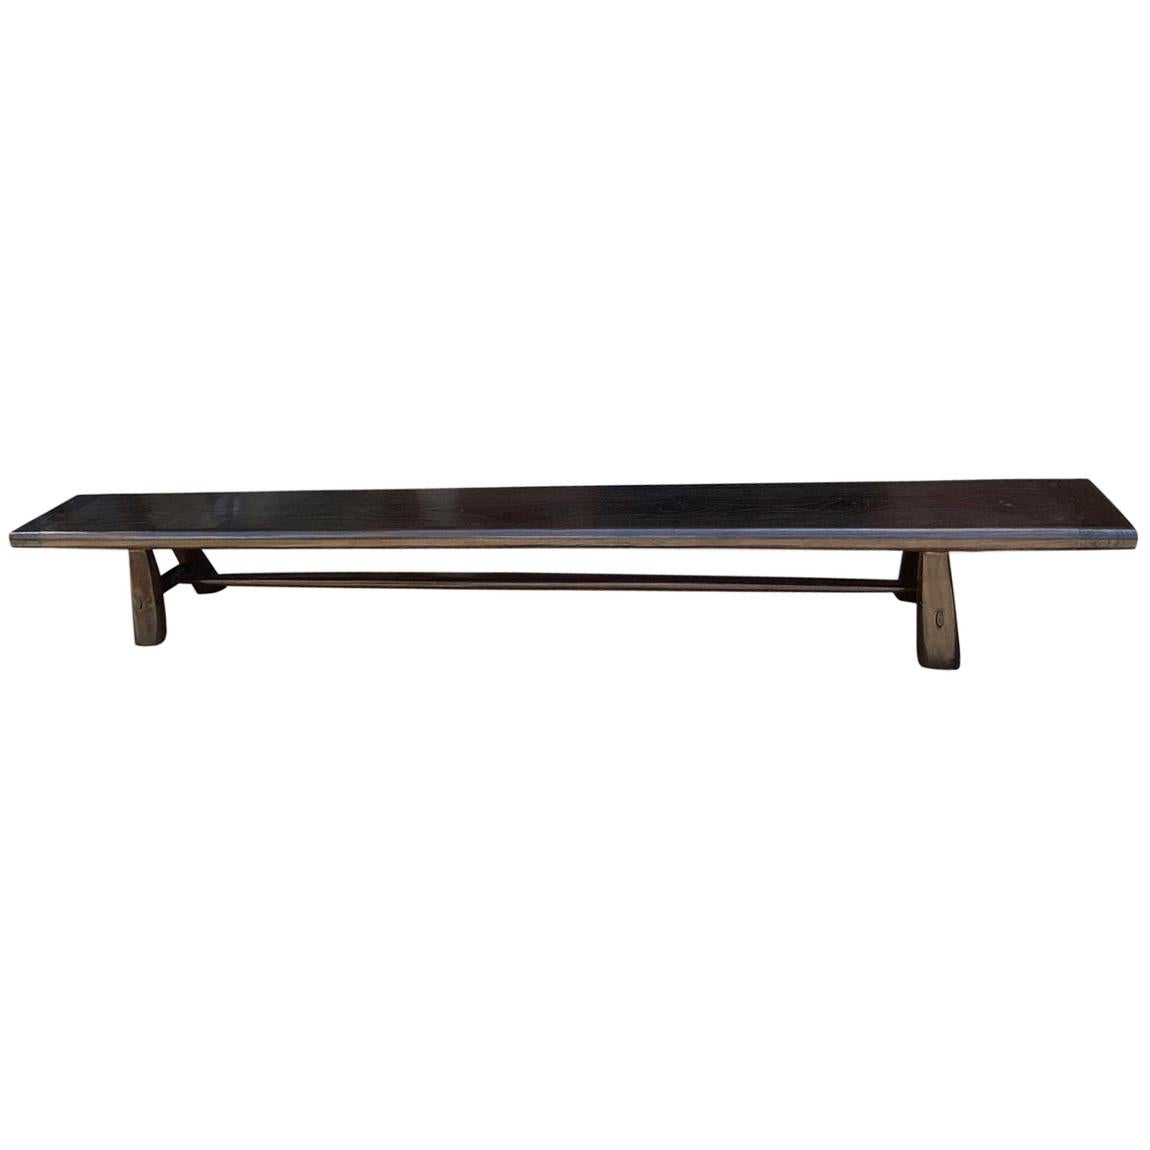 Andrianna Shamaris Midcentury Couture Espresso Stained Teak Wood Long Bench